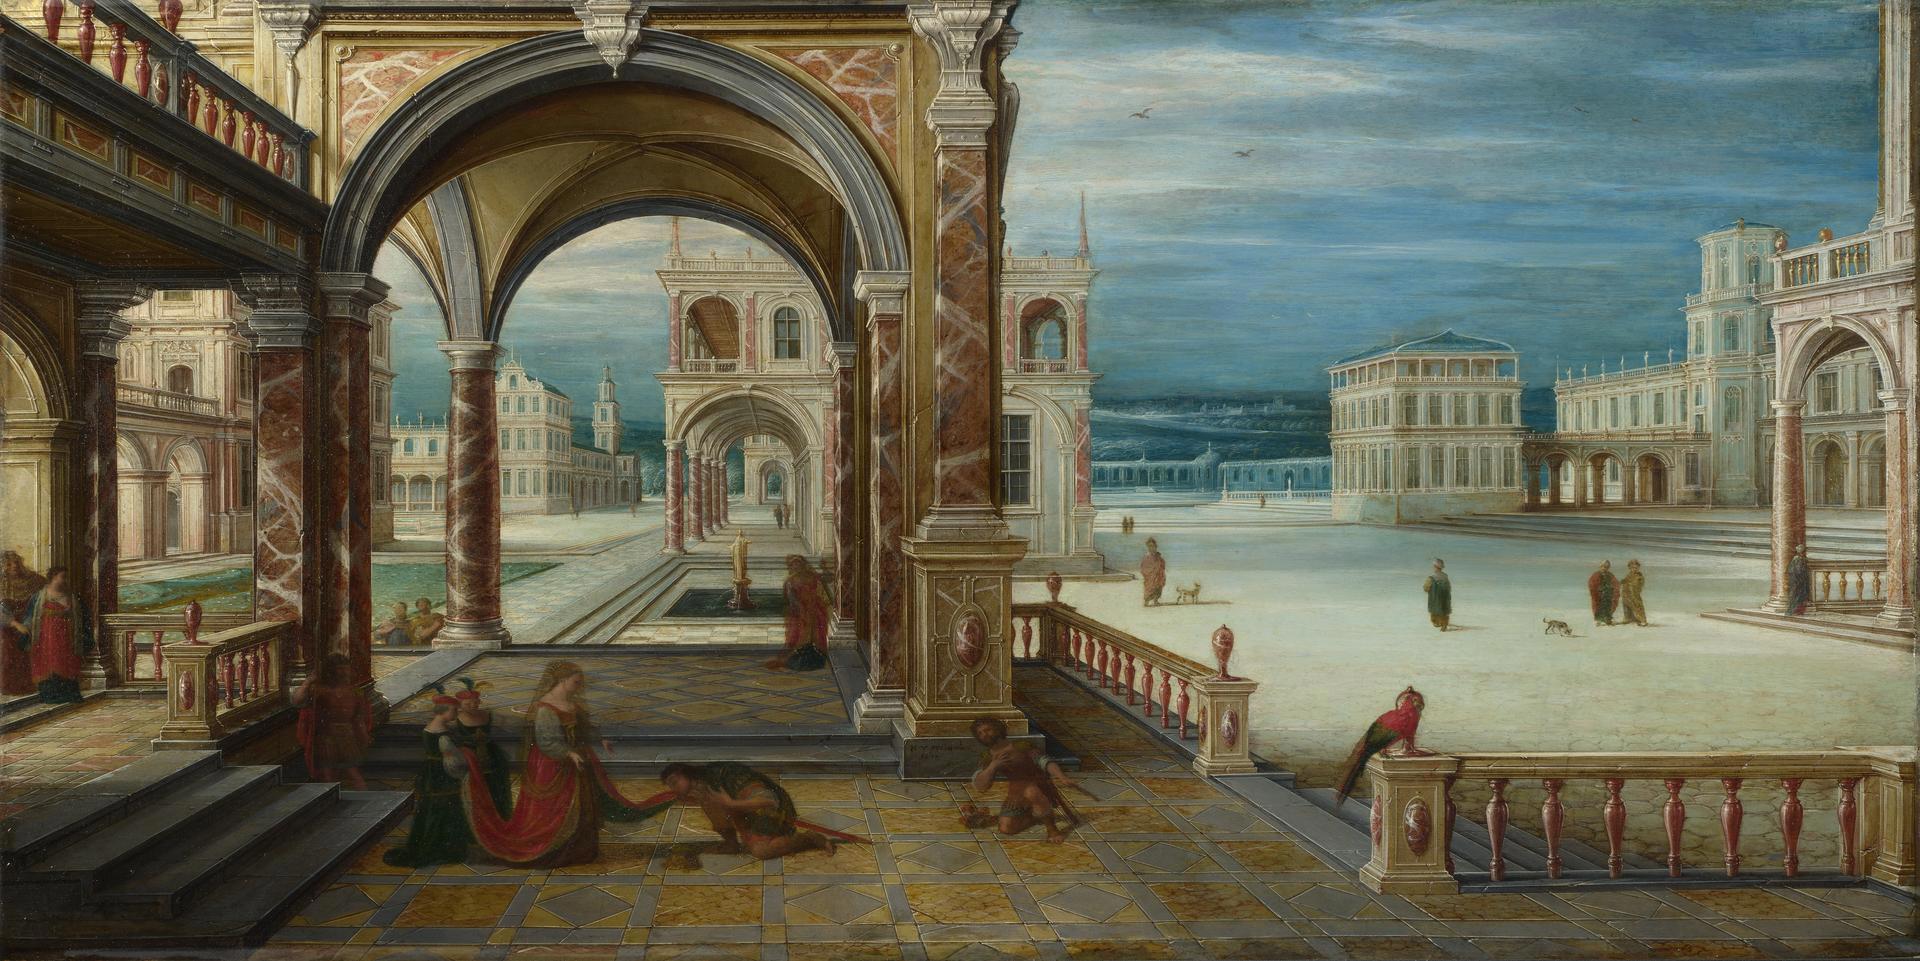 The Courtyard of a Renaissance Palace by Hendrick van Steenwyck the Younger